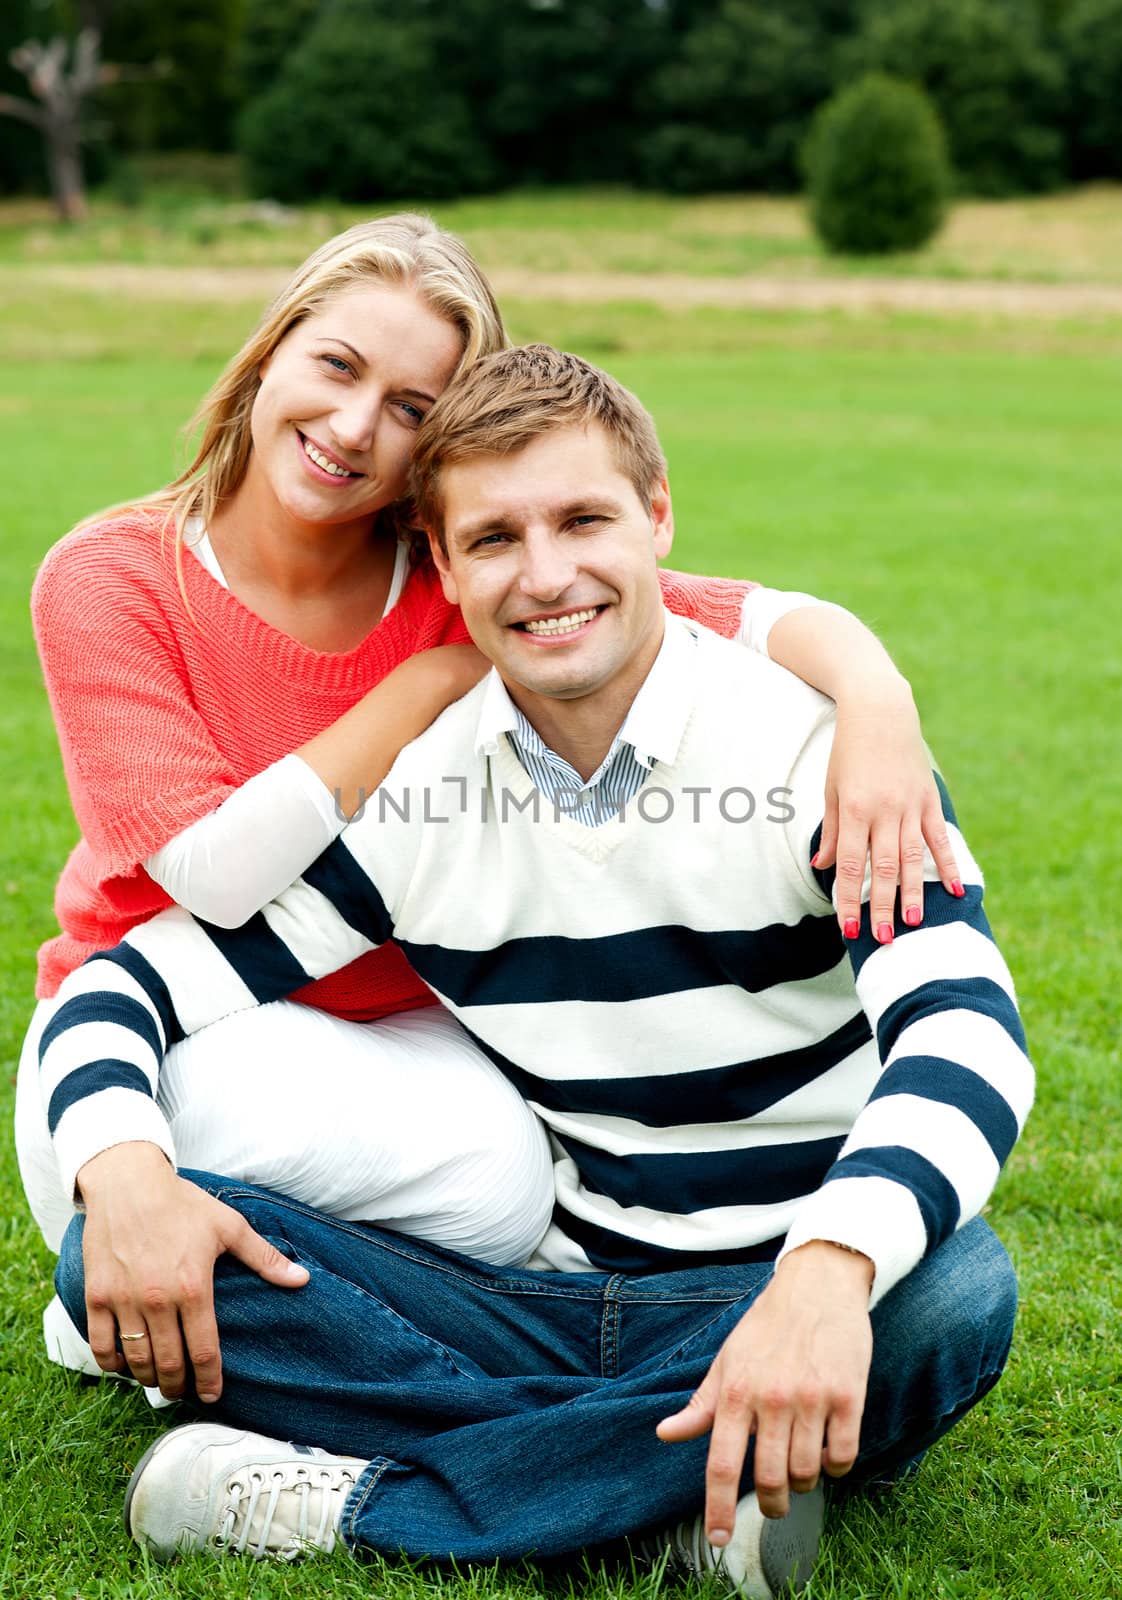 Adorable love couple, woman embracing her man. Nature background